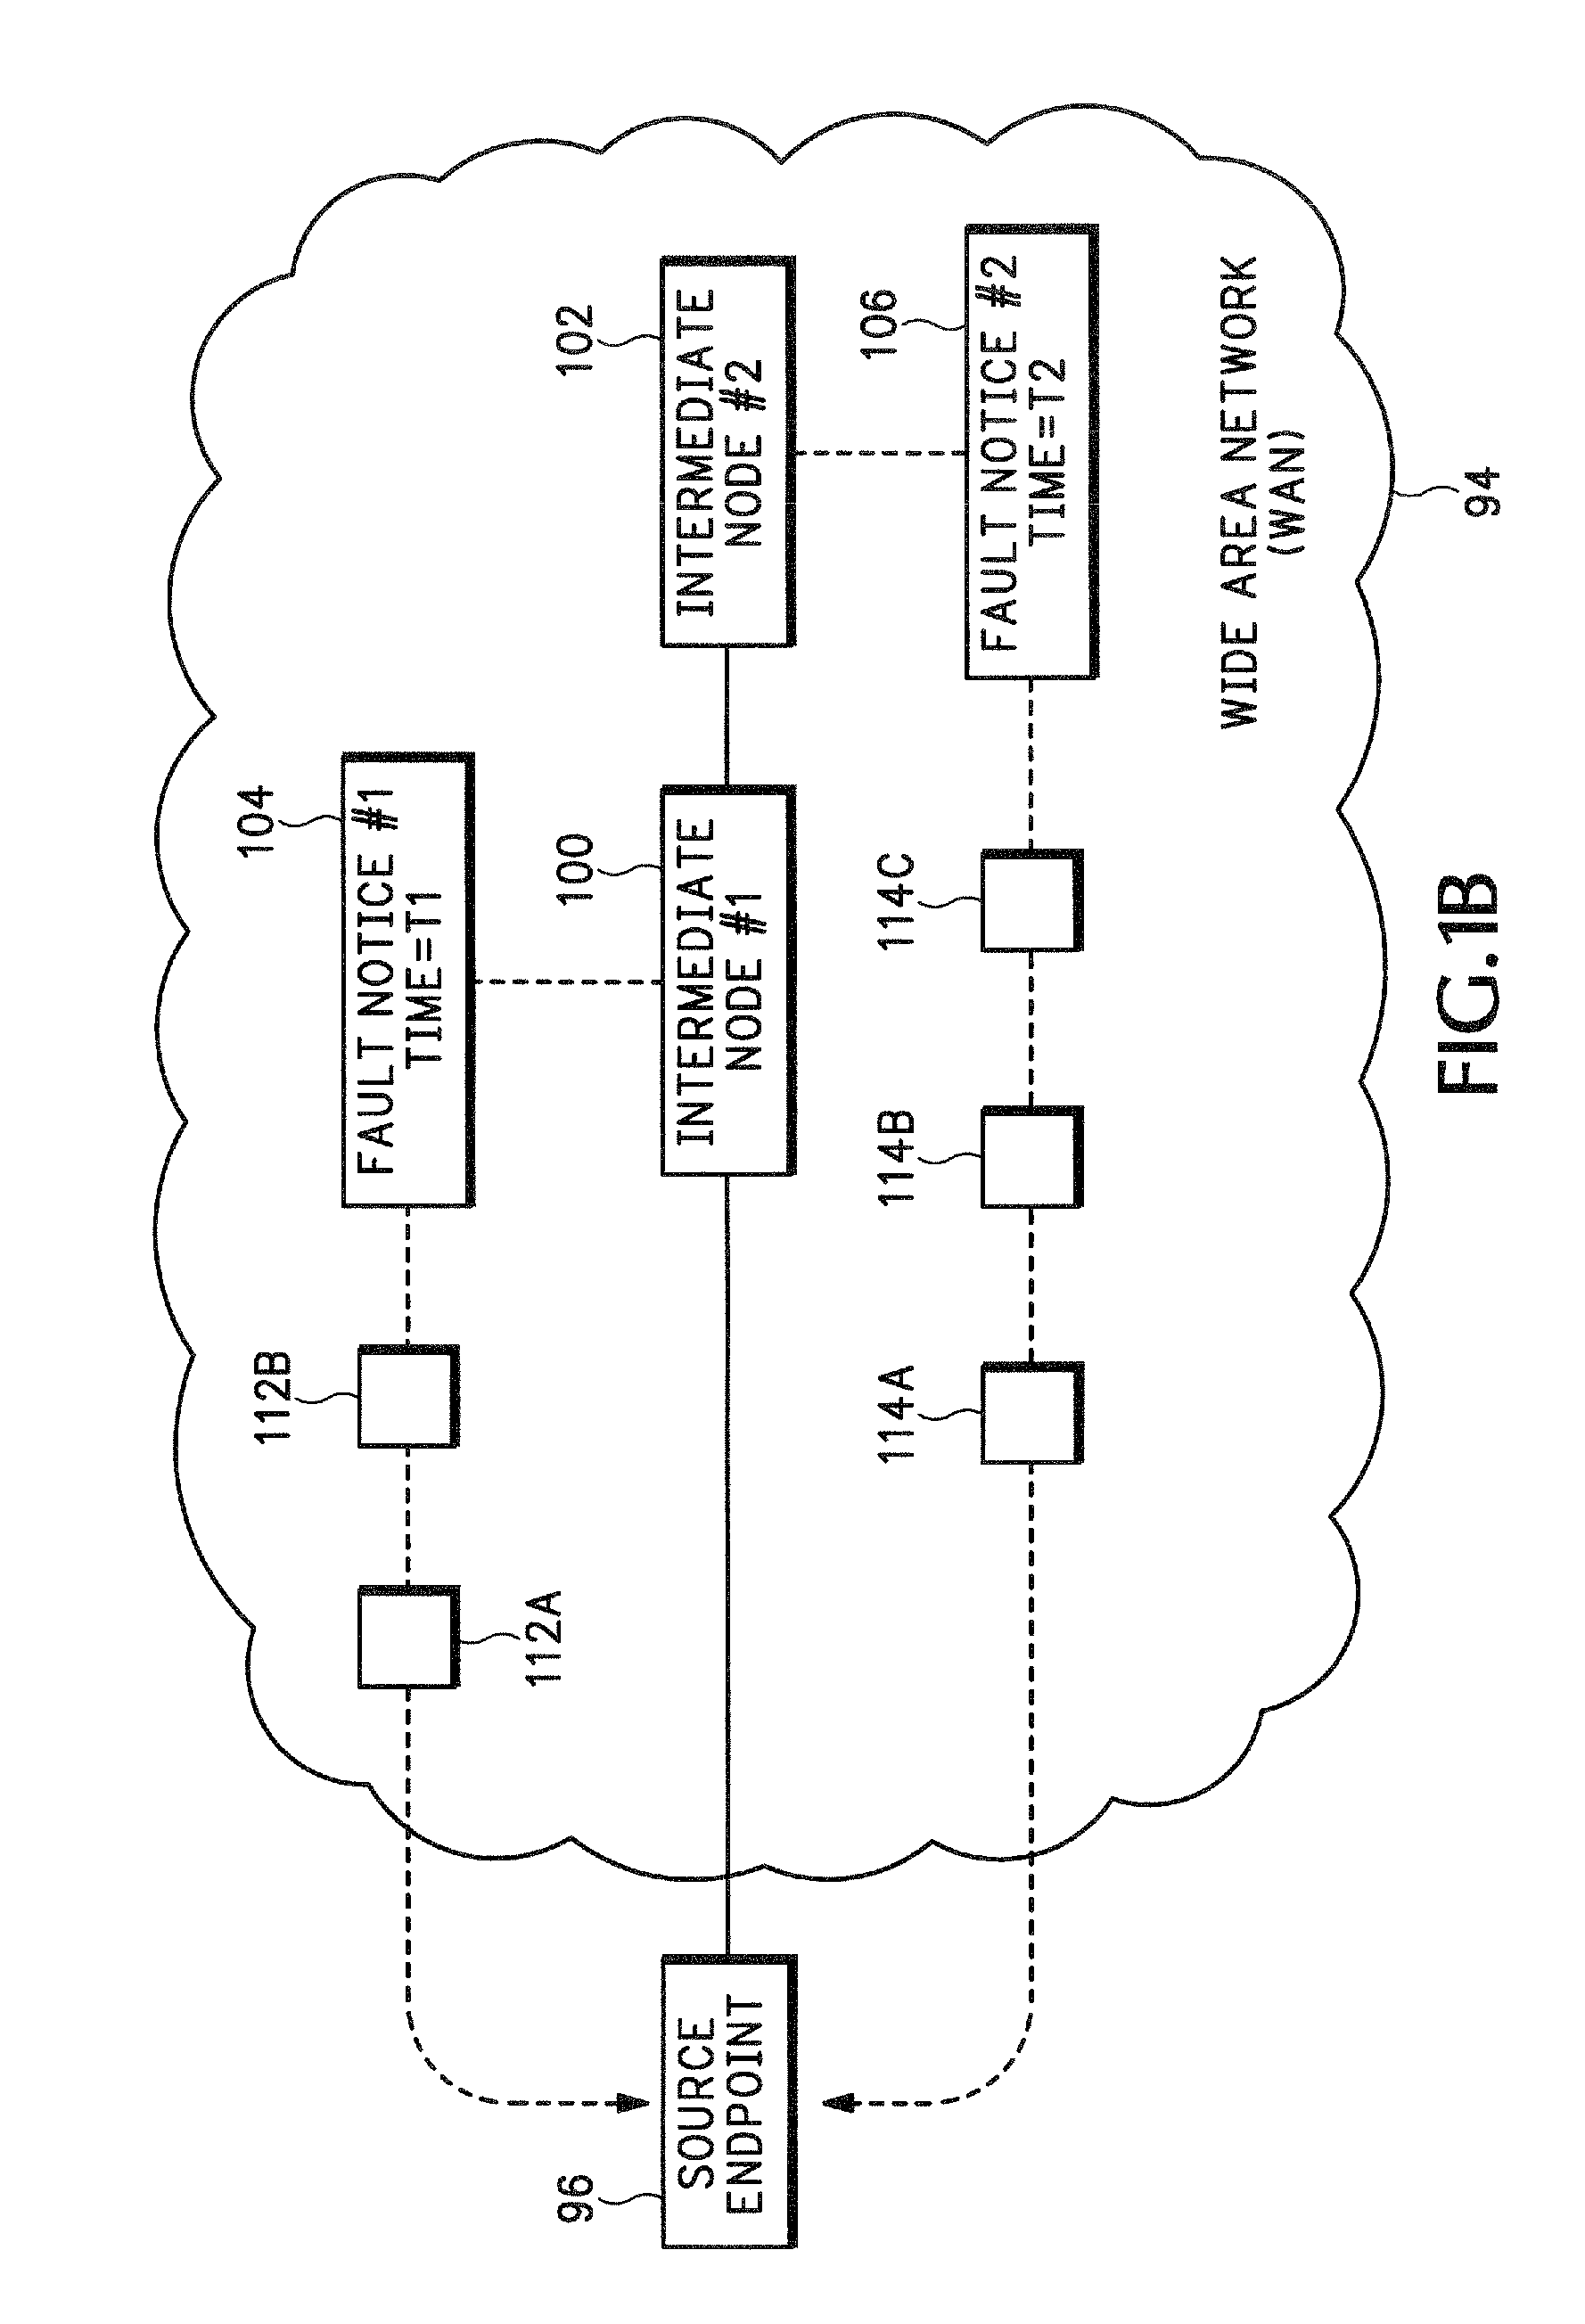 Method and apparatus for measuring one-way delay at arbitrary points in network